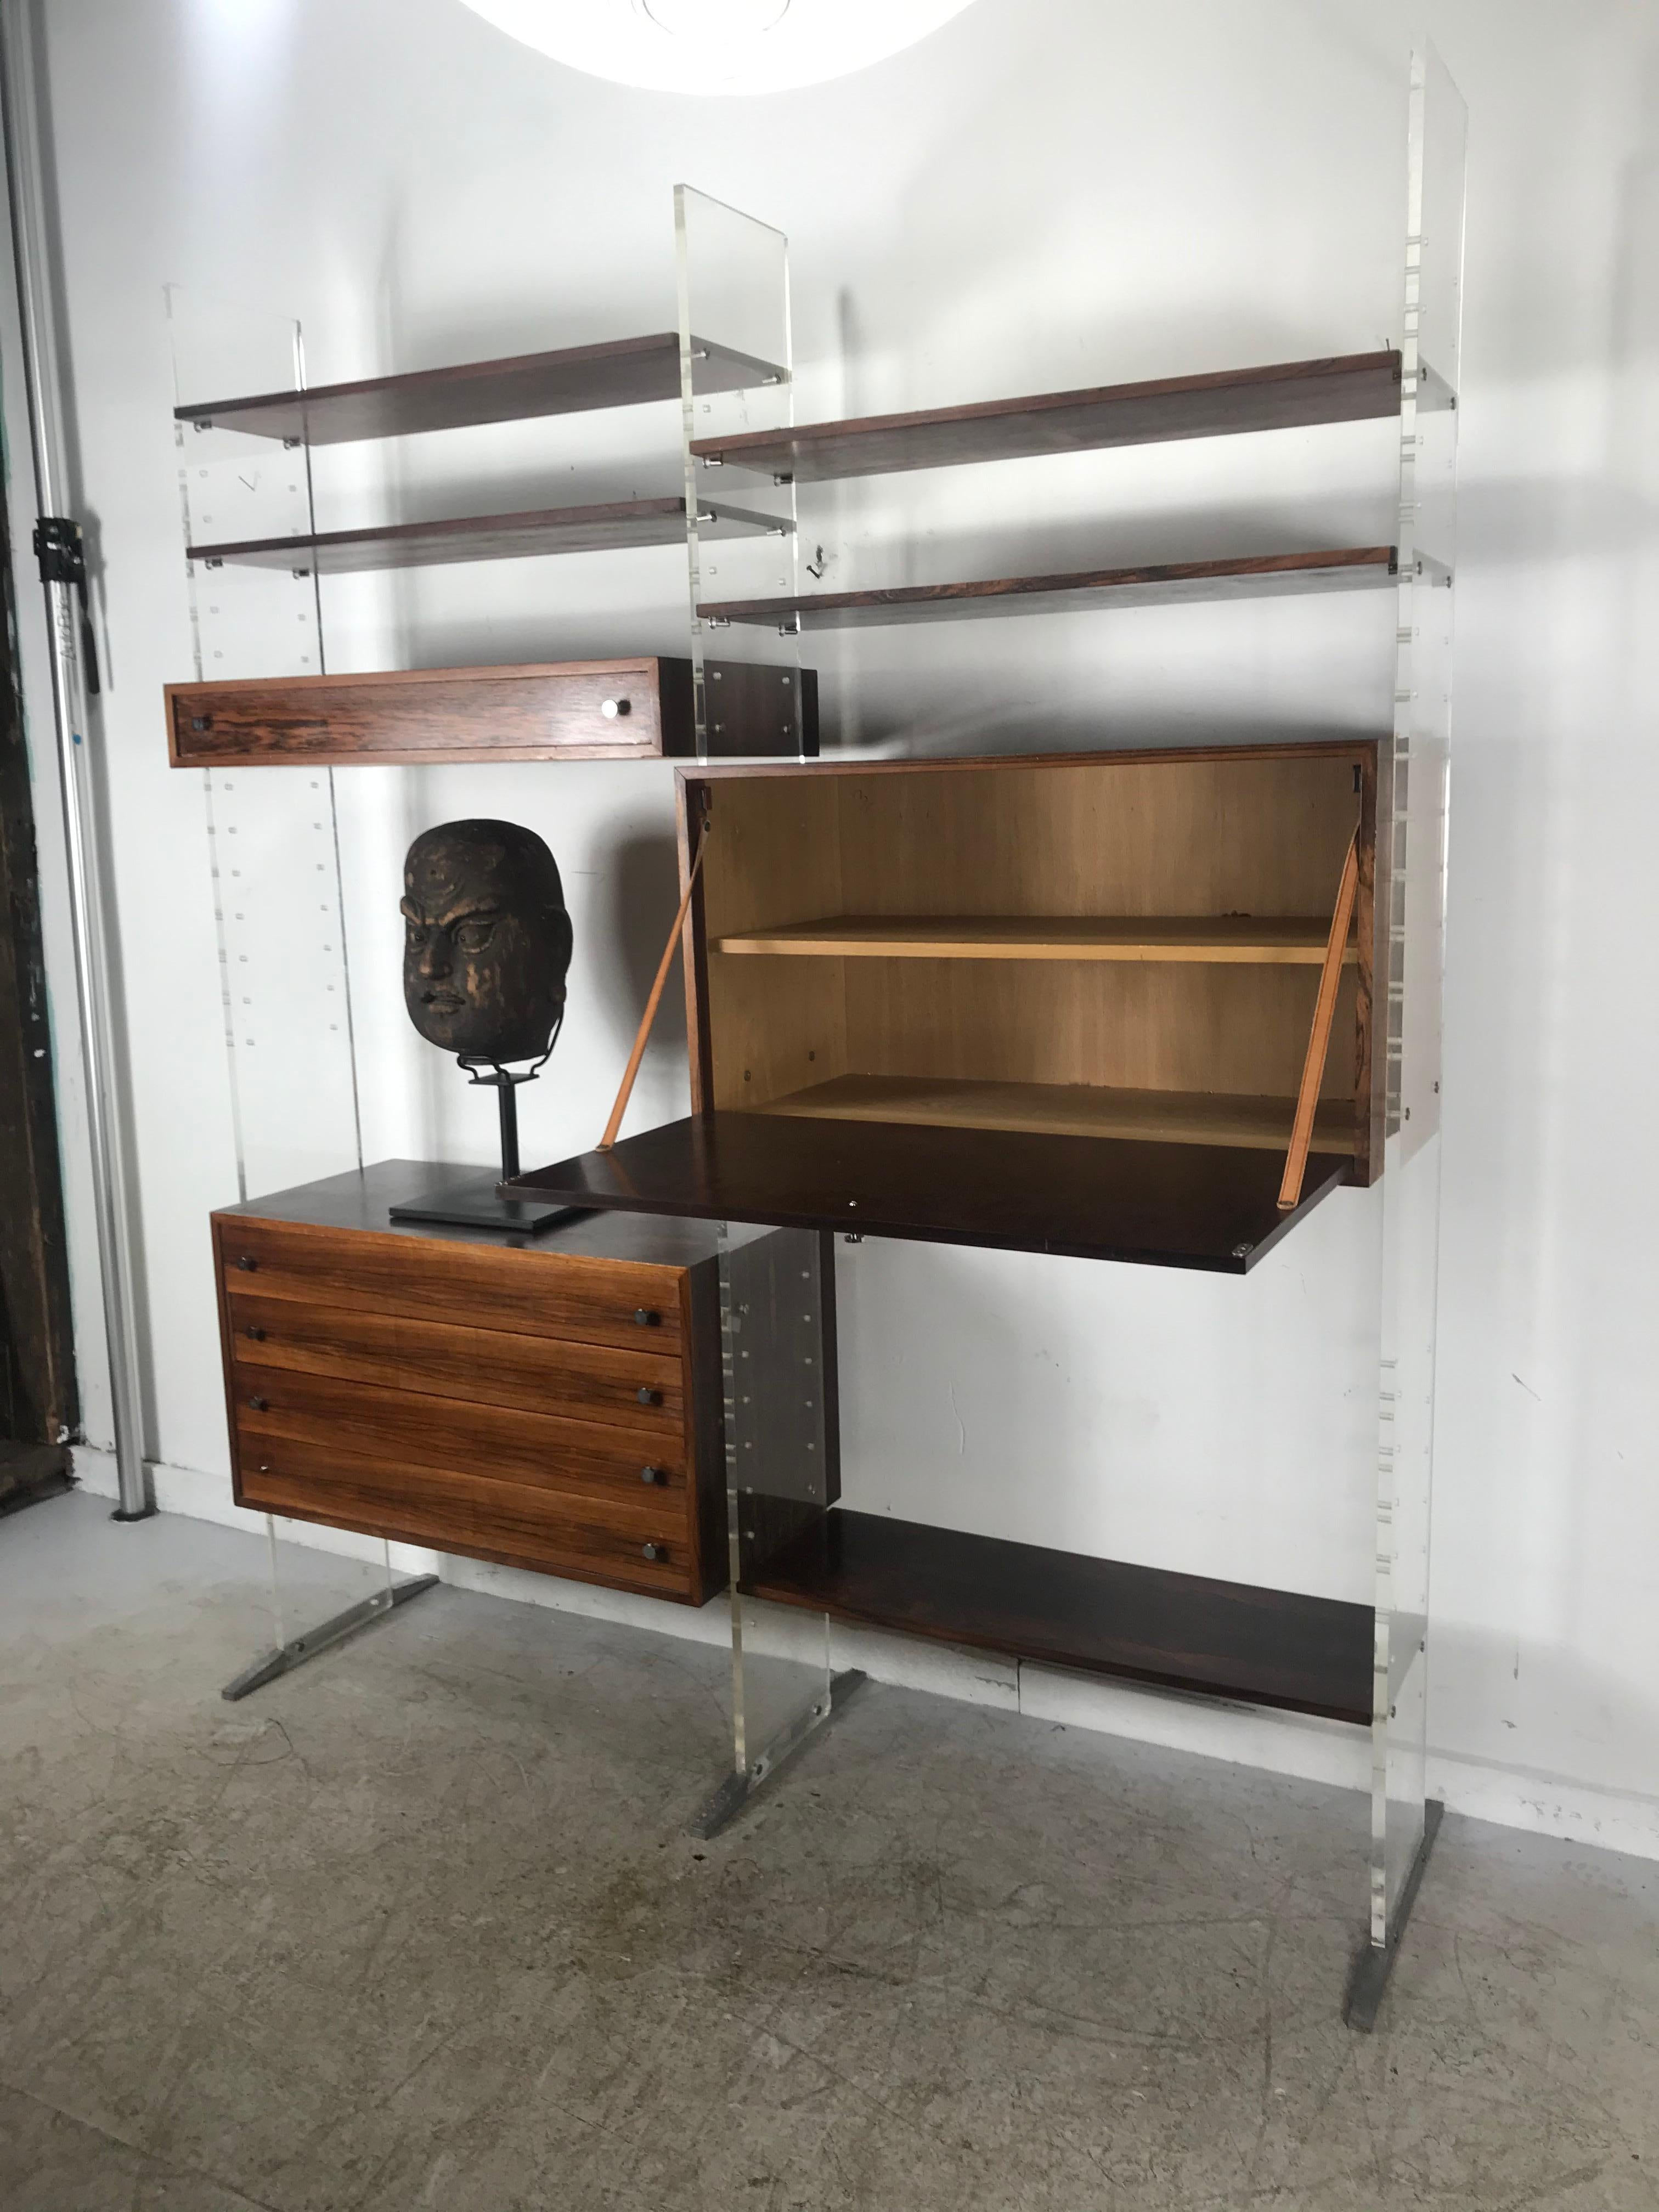 Danish Poul Nørreklit Wall Unit in Plexiglass / Lucite and Rosewood, Denmark, 1960s For Sale